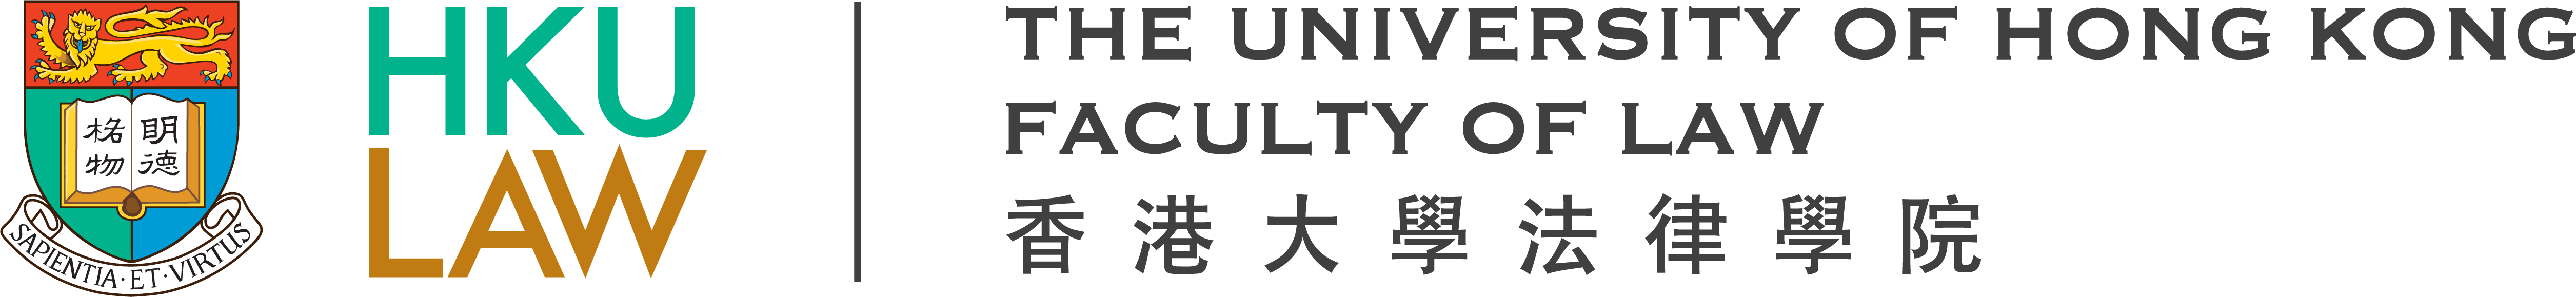 HKU FACULTY OF LAW E-NEWSLETTER